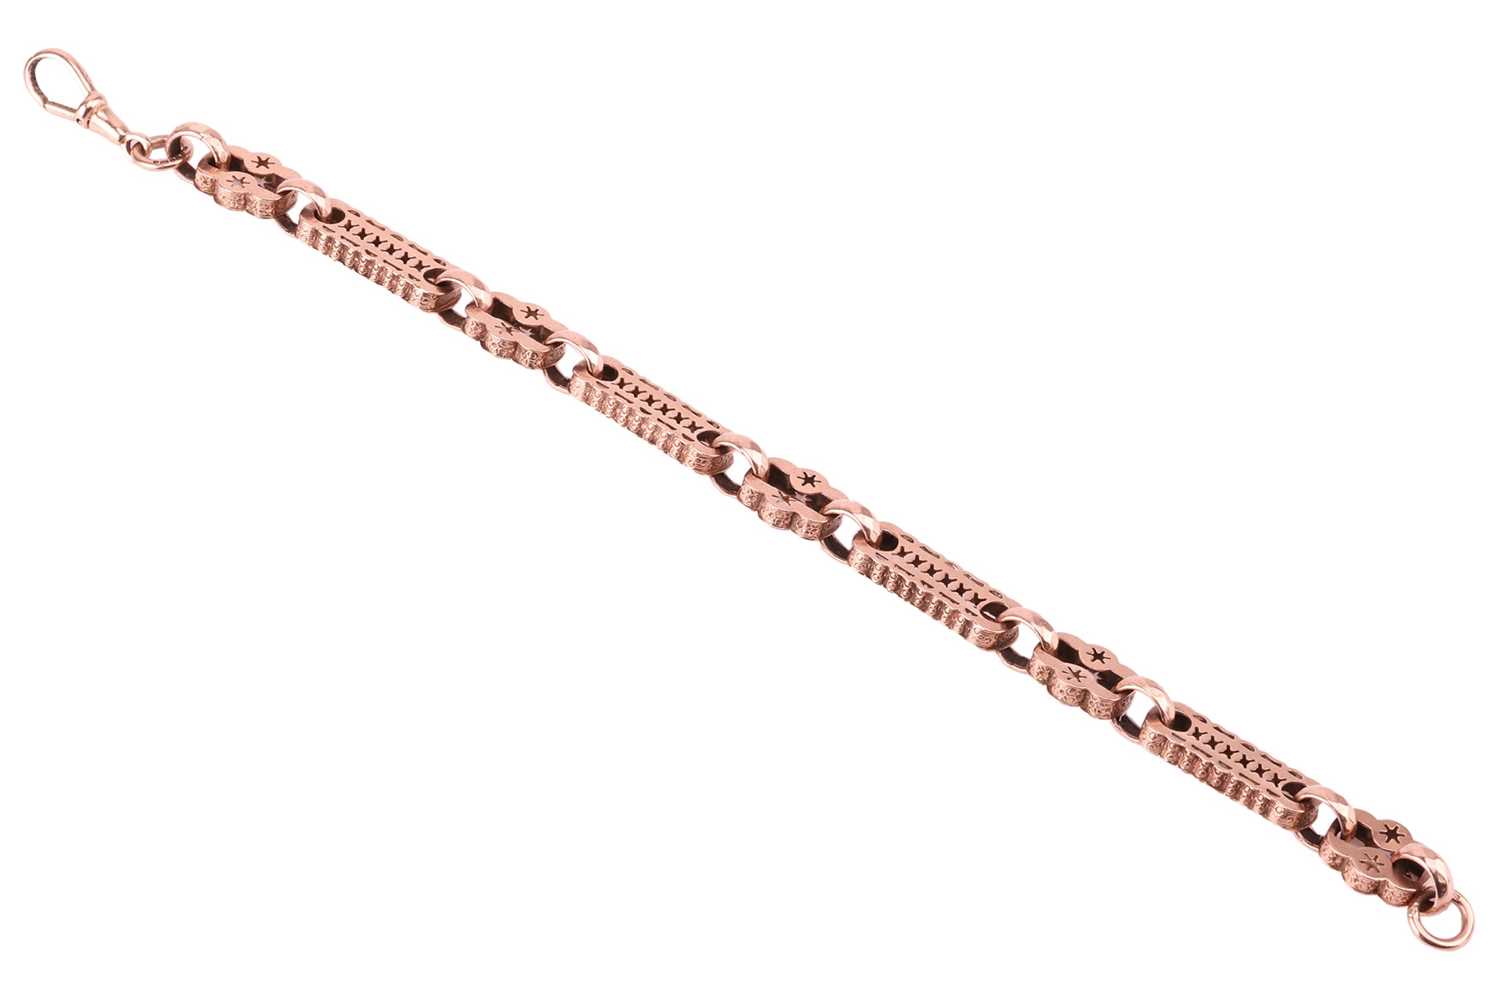 A fancy link bracelet in 9ct rose gold, hollow links with pierced design and a scalloped edge, compl - Image 2 of 3